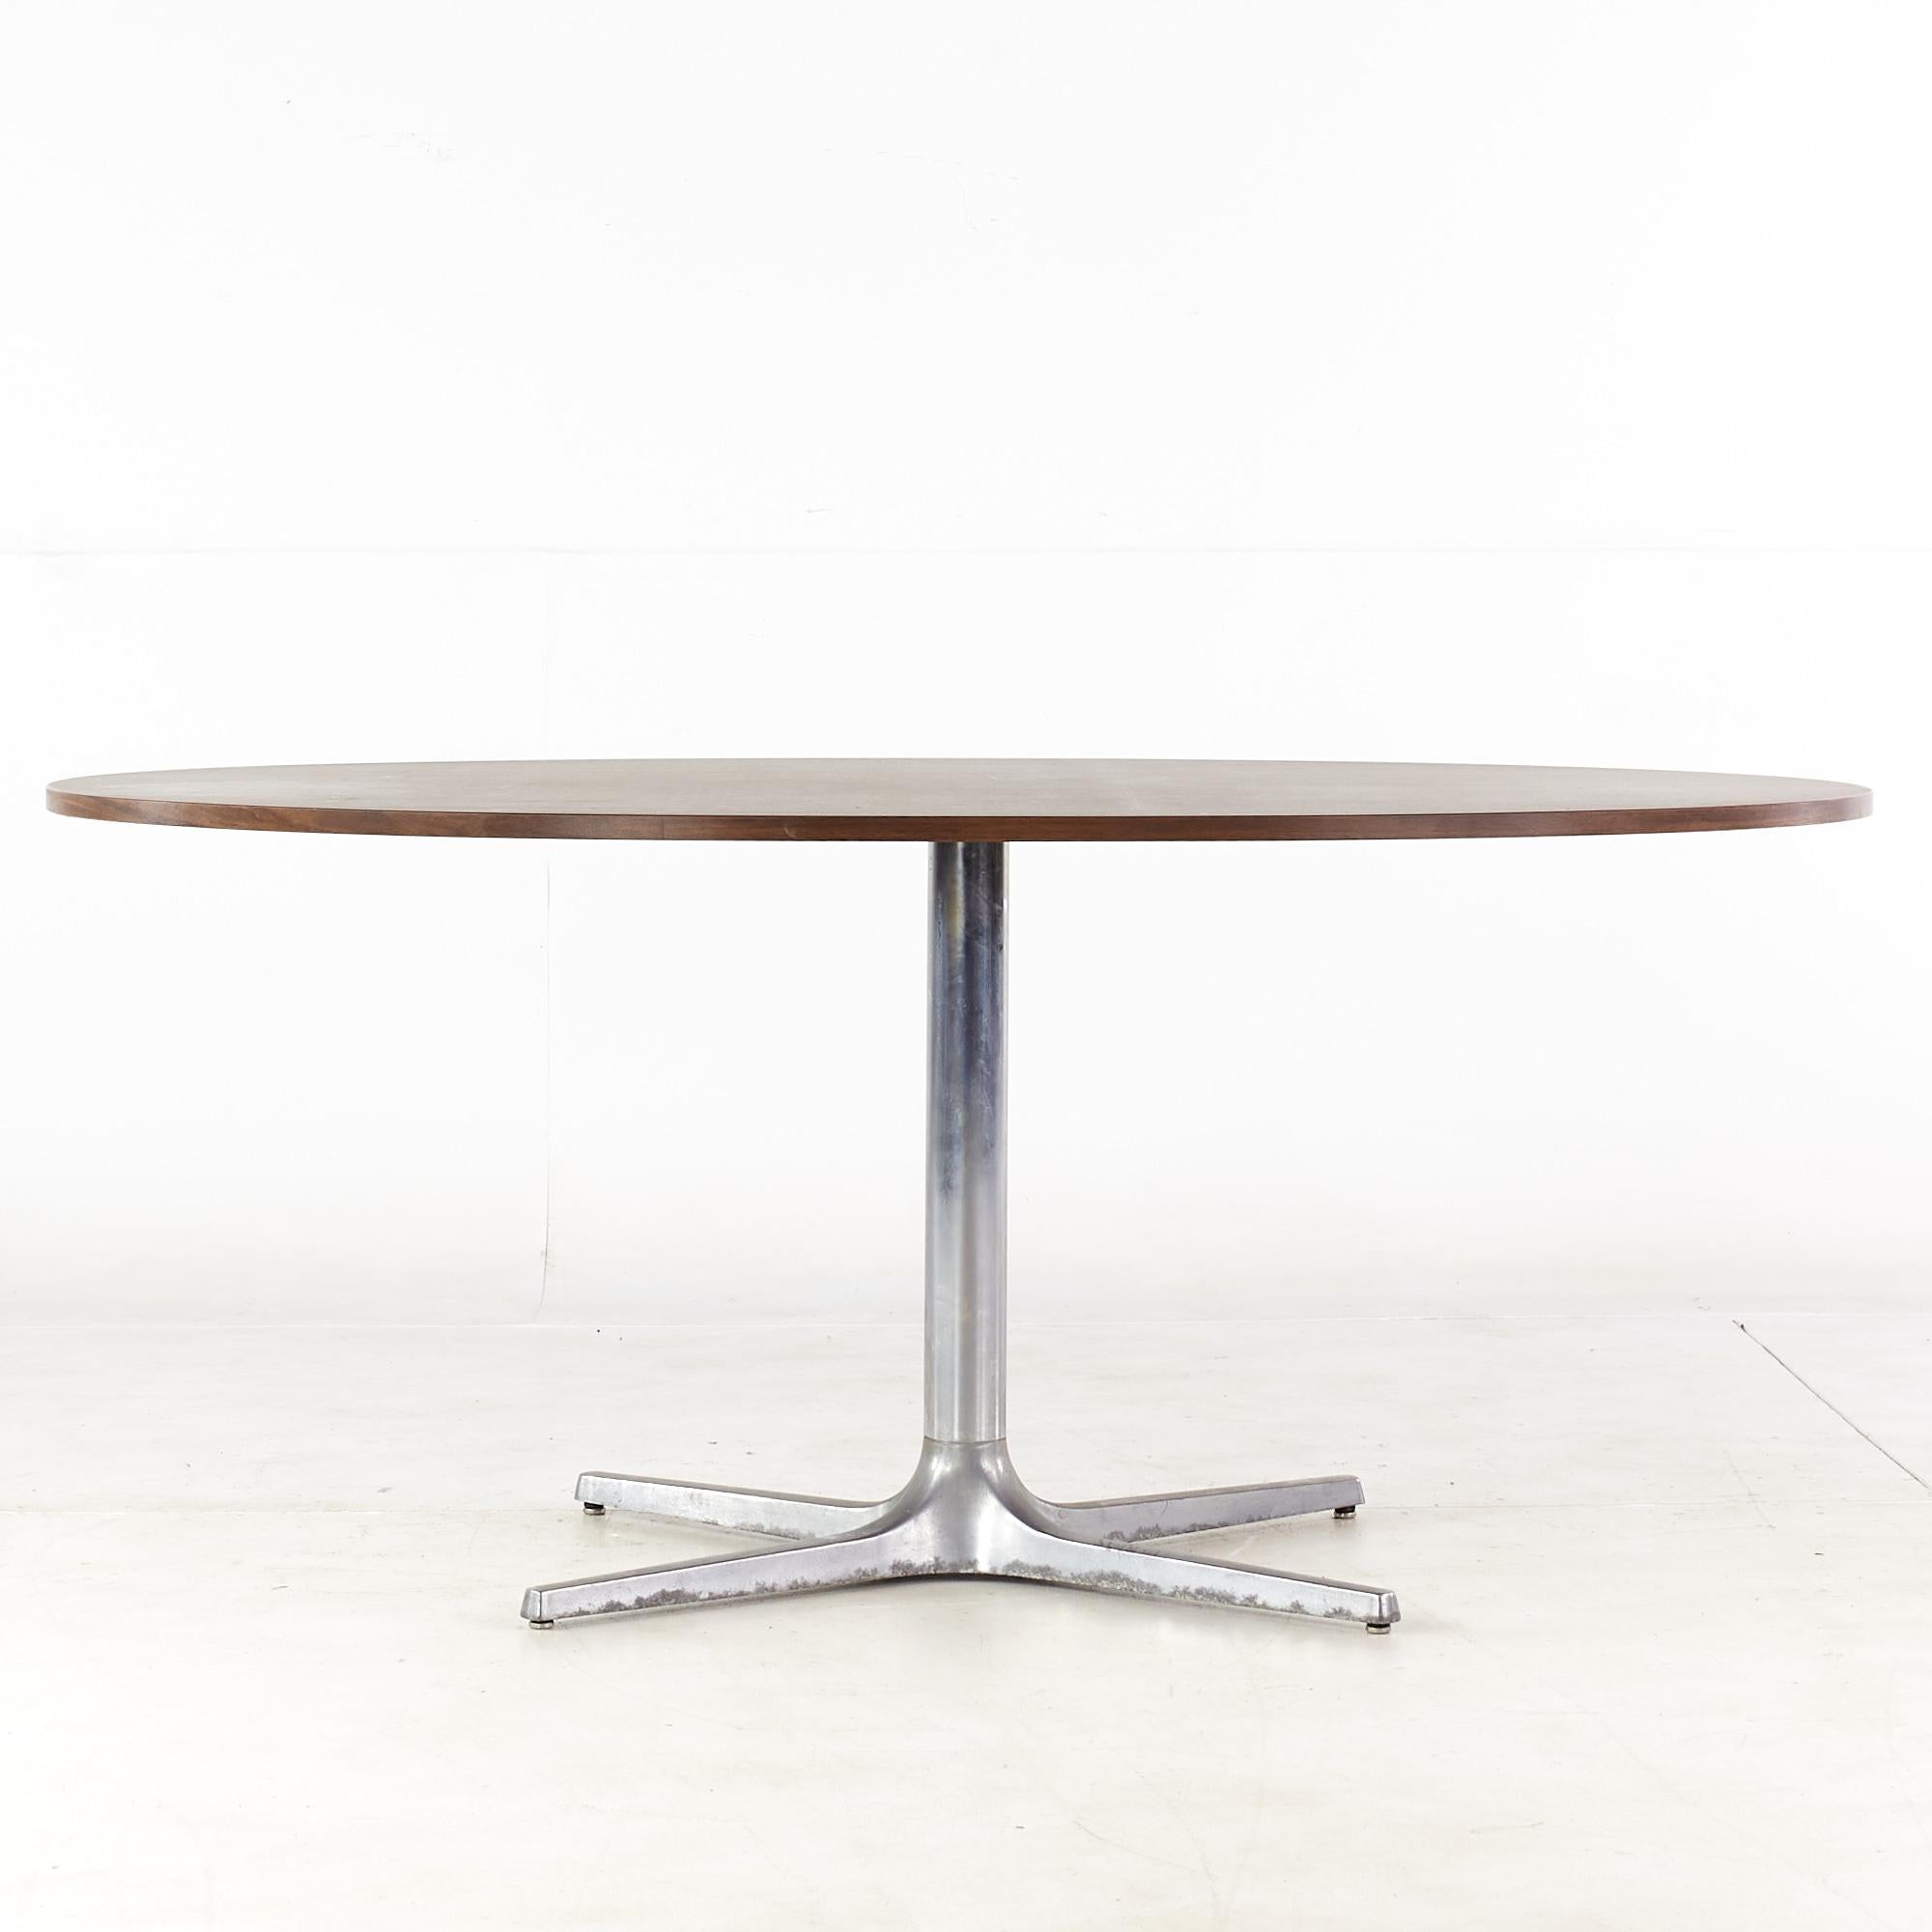 Chromcraft mid-century dining table with knoll style laminate top.

This table measures: 65.75 wide x 44.75 deep x 28.5 high, with a chair clearance of 27.75 inches.

All pieces of furniture can be had in what we call restored vintage condition.